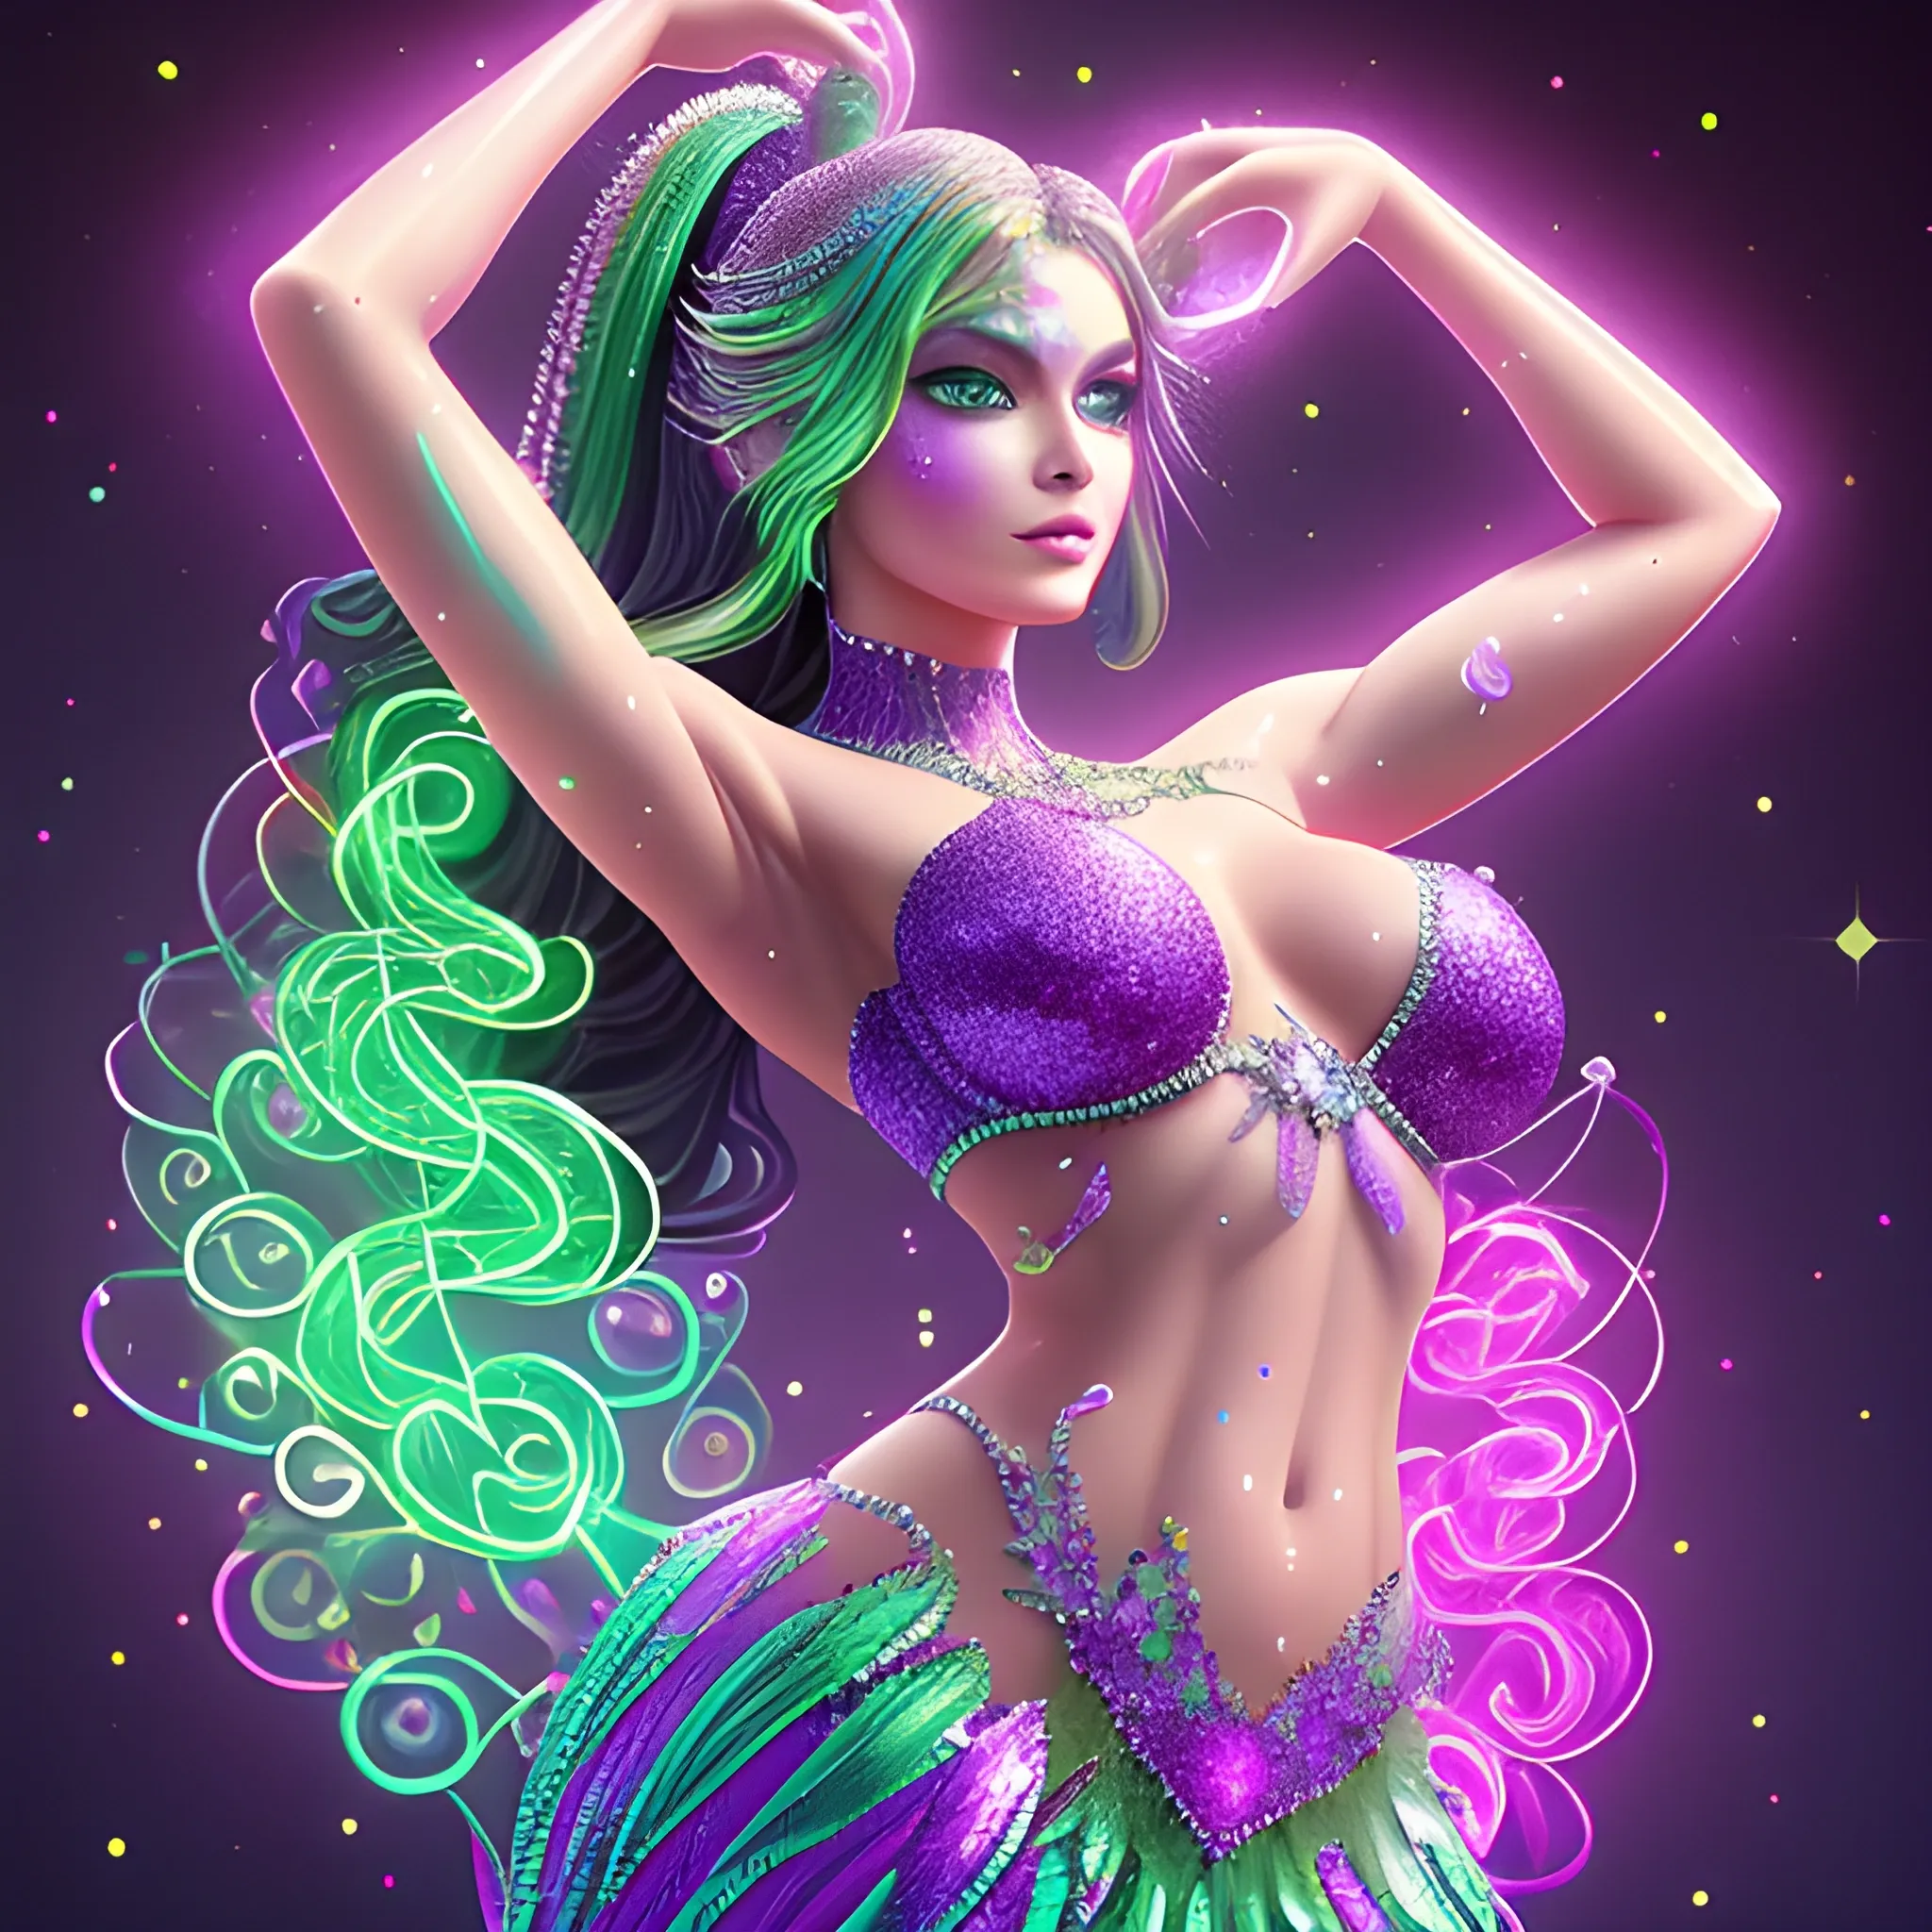 Charlotte, anatomically correct perfect body, highly detailed beautiful face, green midriff sequin dress, meticulously detailed multi-hued long dark curly hair, holding a purple crystal ball in her hand; digital painting, smooth, sharp focus, colorful illustration, art by Lisa Frank, James R. Eads, artgerm and Maxfield Parrish; luminous color sparkles, glitter, neon, airbrush, Unreal Engine